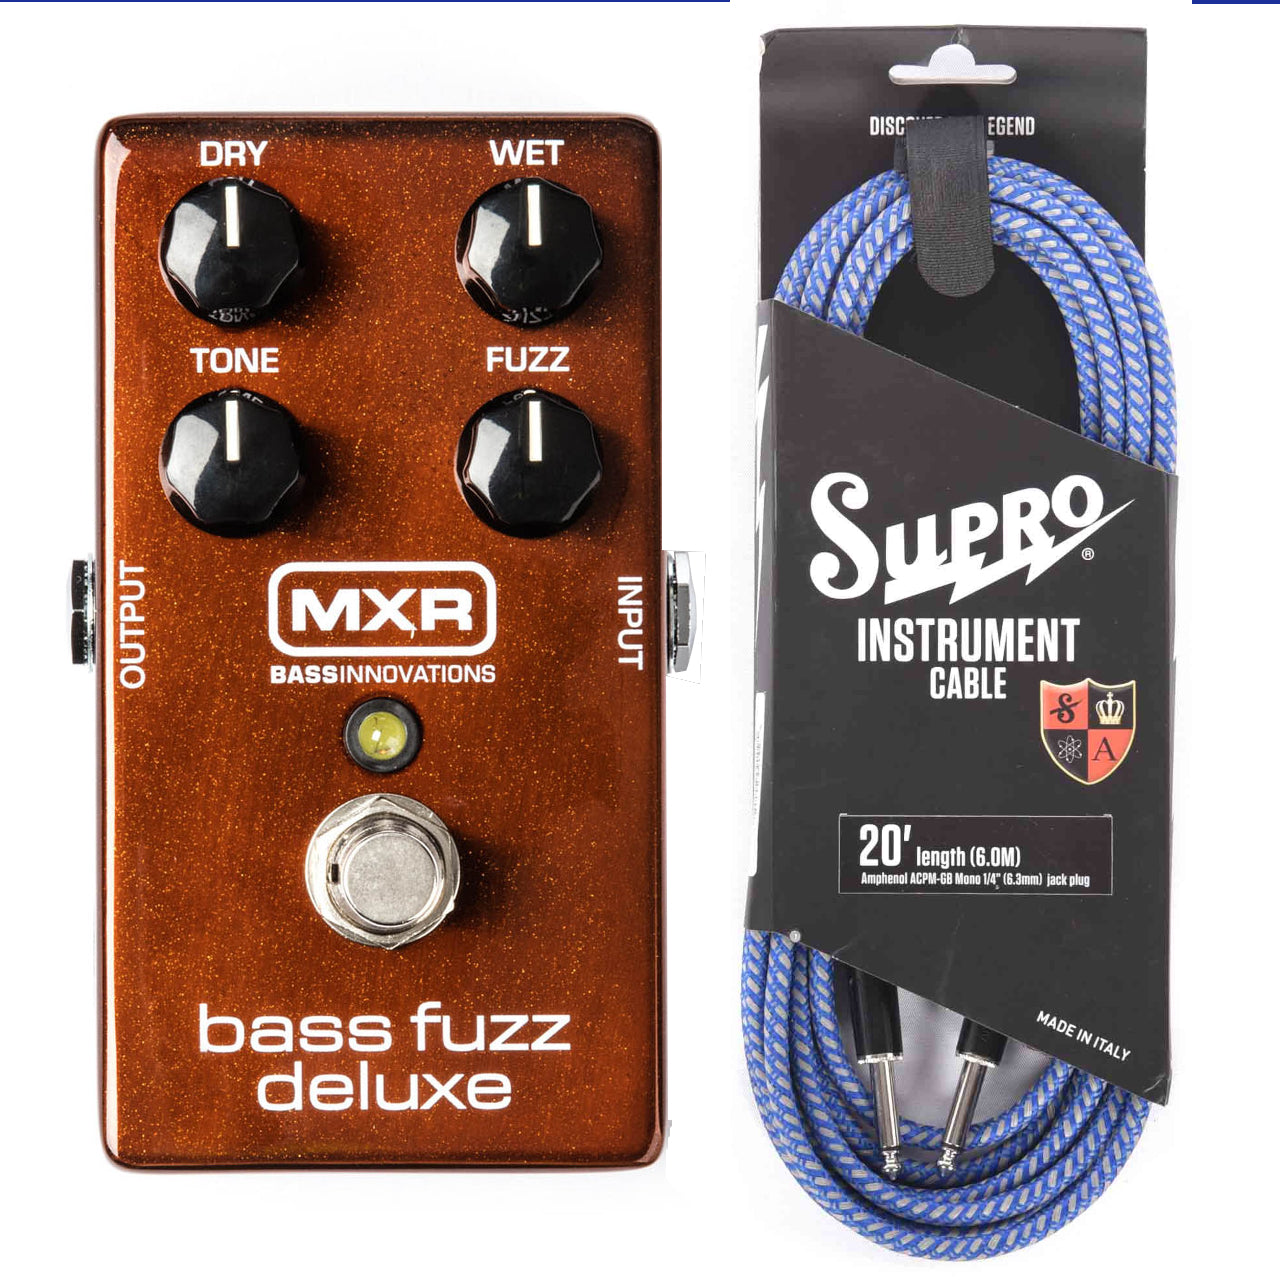 Dunlop MXR M84 Bass Fuzz Deluxe Effect Pedal + FREE Supro 20' Cable